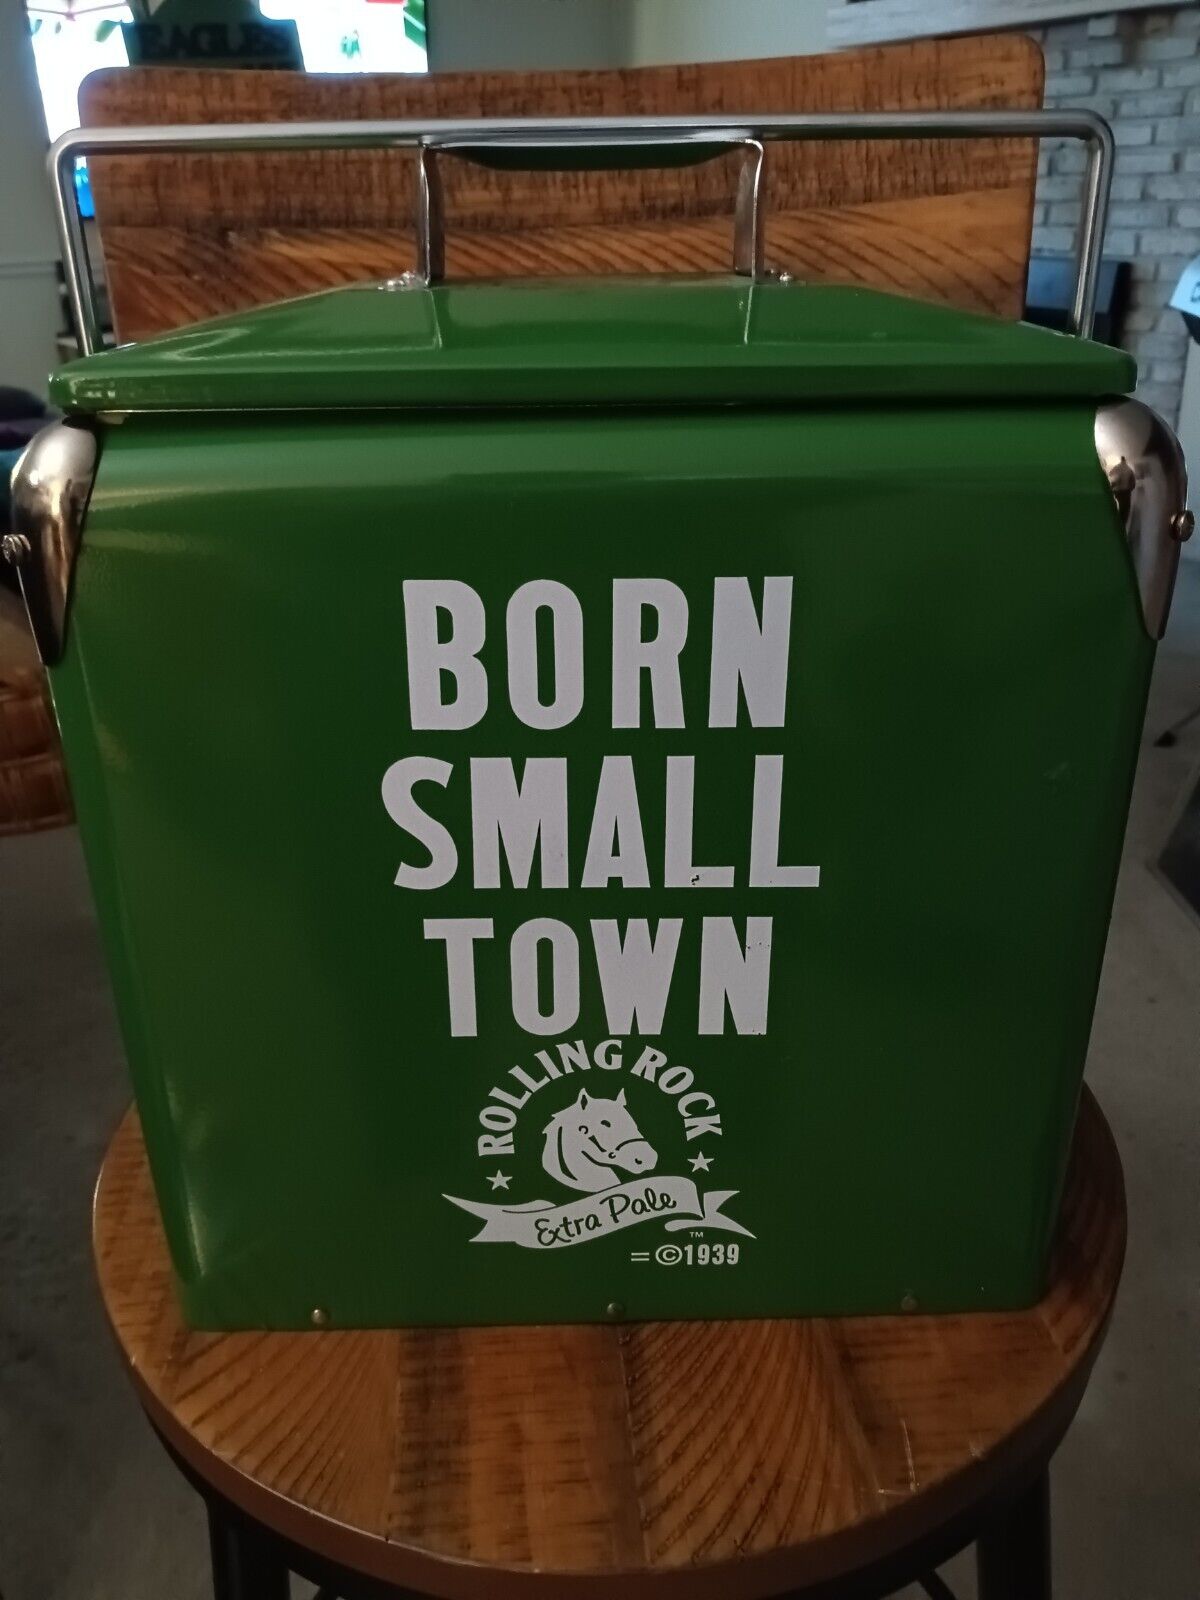 VINTAGE ROLLING ROCK BEER COOLER - BORN SMALL TOWN